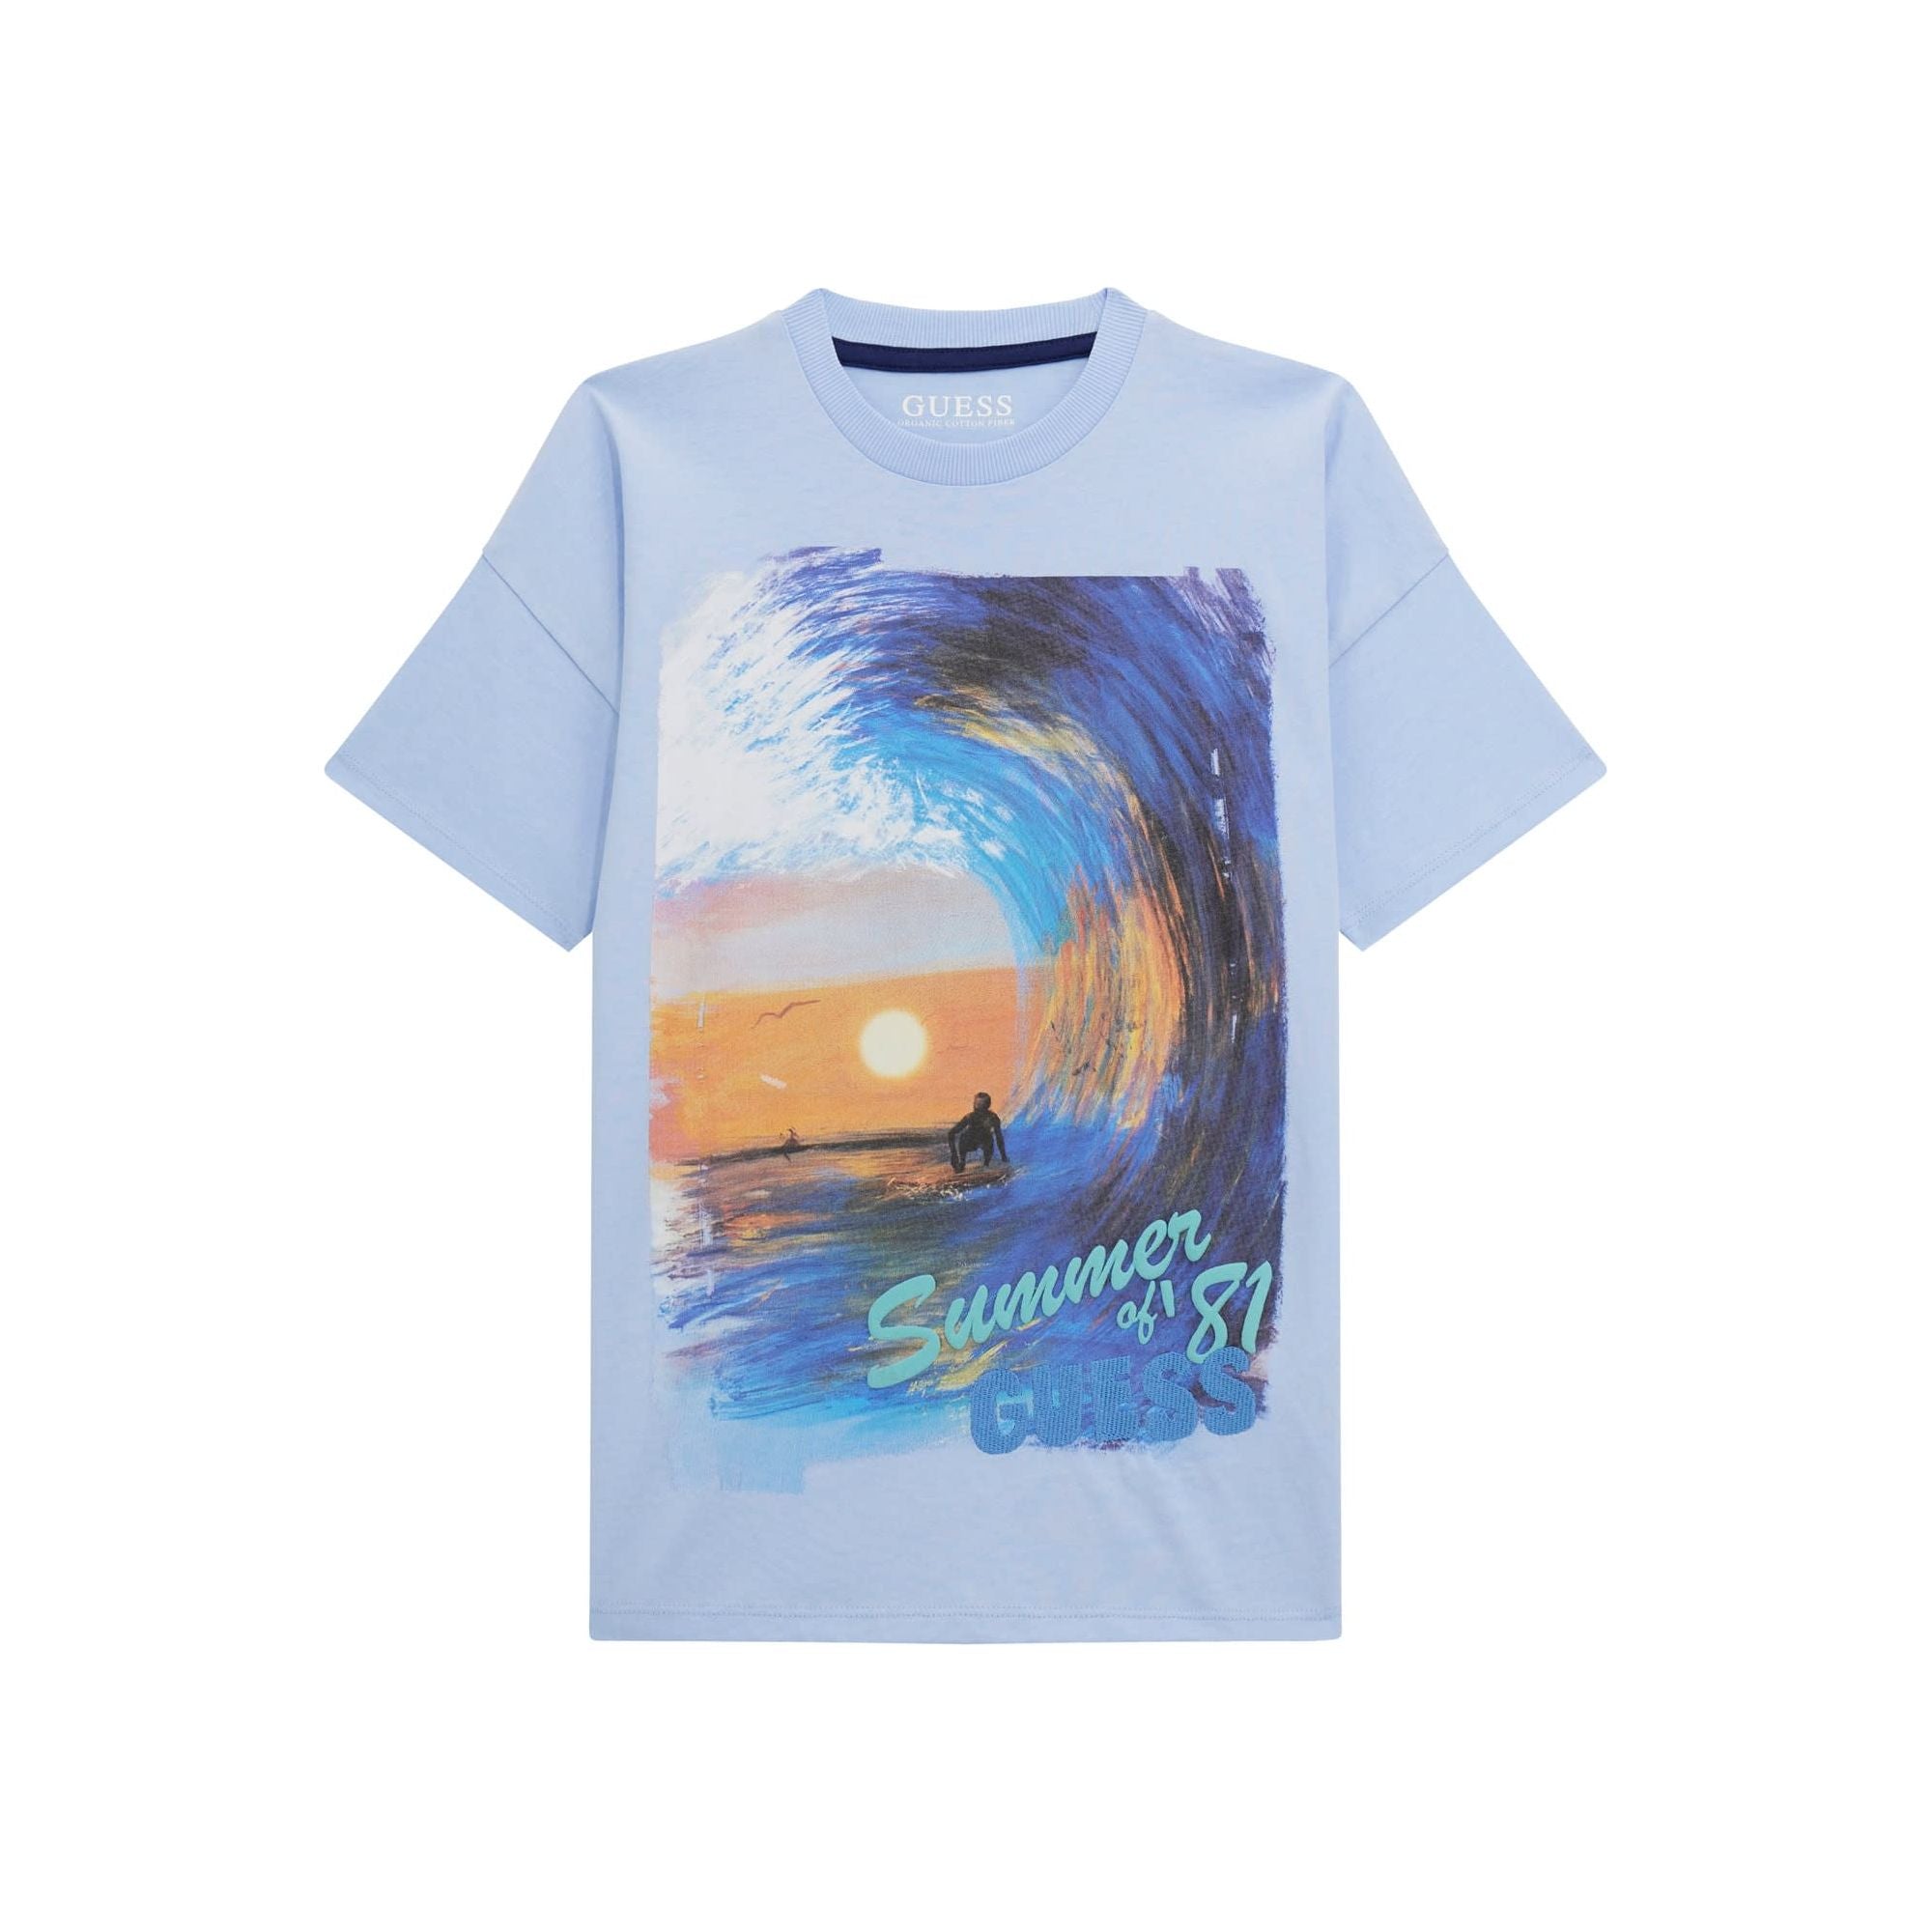 Guess - Boys Oversized Tee in Soft Blue